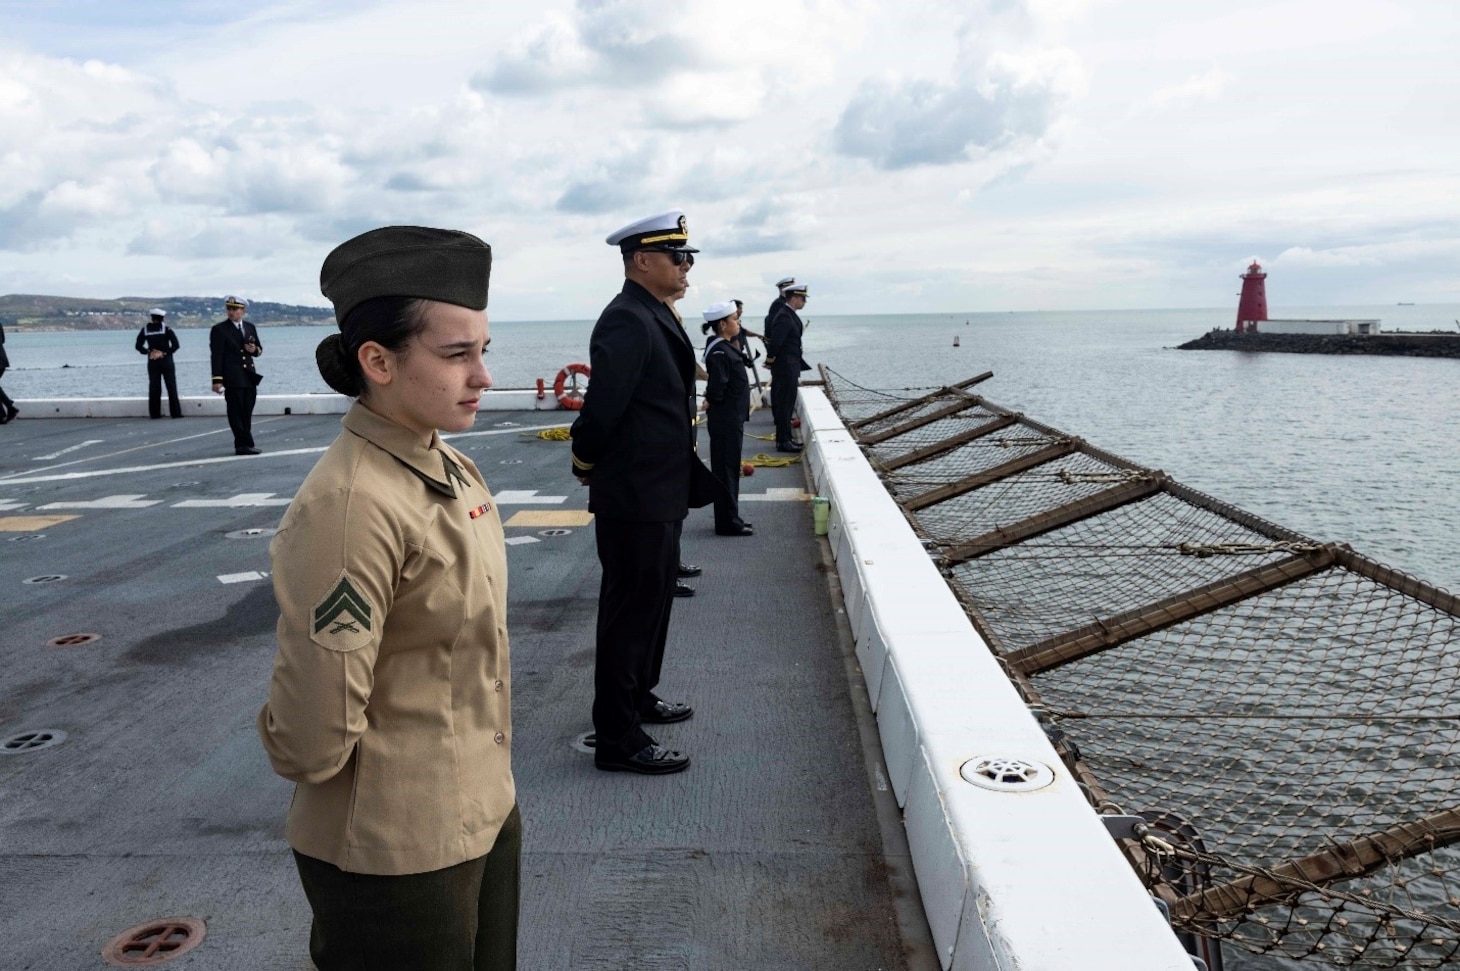 Sailors and Marines man the rails as USS Mesa Verde (LPD 19) makes a scheduled port visit to Dublin, Ireland, Aug. 25, 2023. Mesa Verde, assigned to the Bataan Amphibious Ready Group and embarked 26th MEU(SOC), under the command and control of Task Force 61/2, is on a scheduled deployment in the U.S. Naval Forces Europe area of operations, employed by U.S. Sixth Fleet to defend U.S., allied and partner interests. (U.S. Marine Corps photo by Staff Sgt. Jesus Sepulveda Torres)